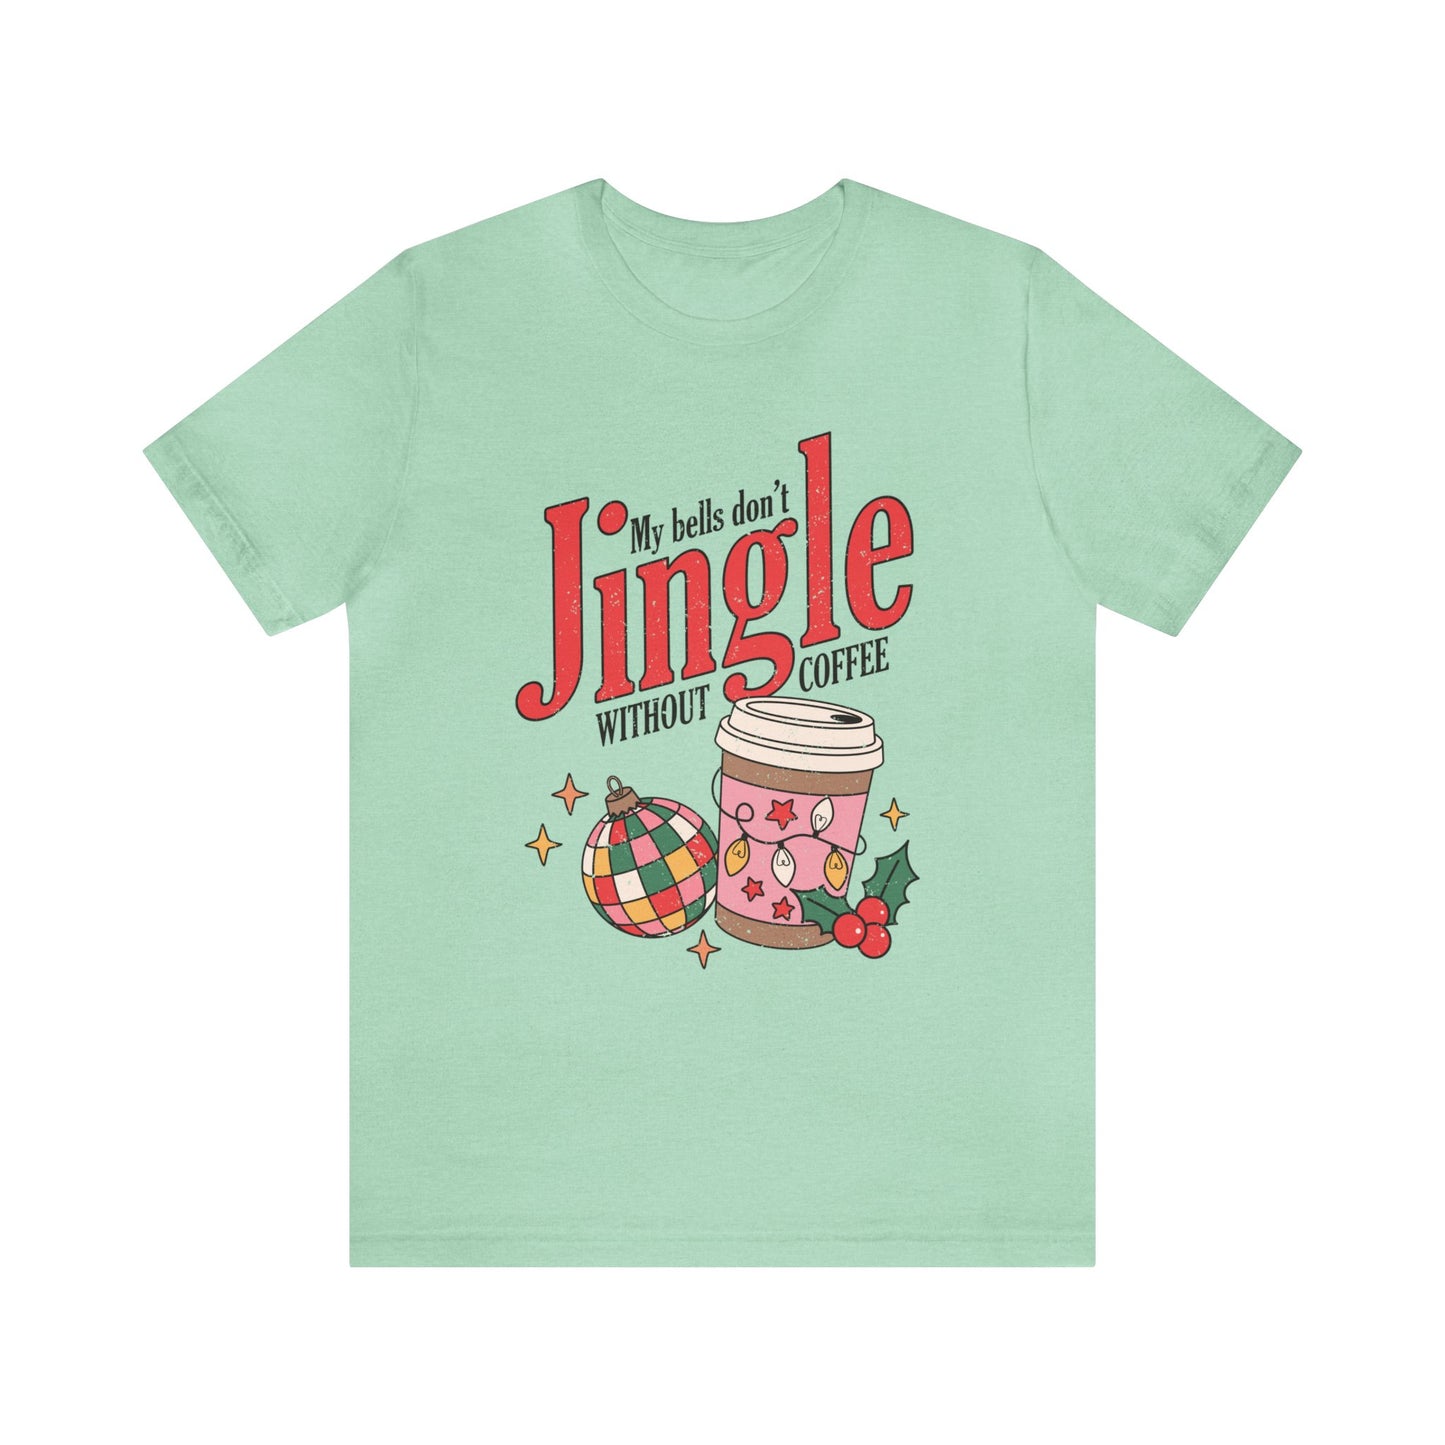 My Bells Don't Jingle Without Coffee Women's Funny Short Sleeve Christmas T Shirt